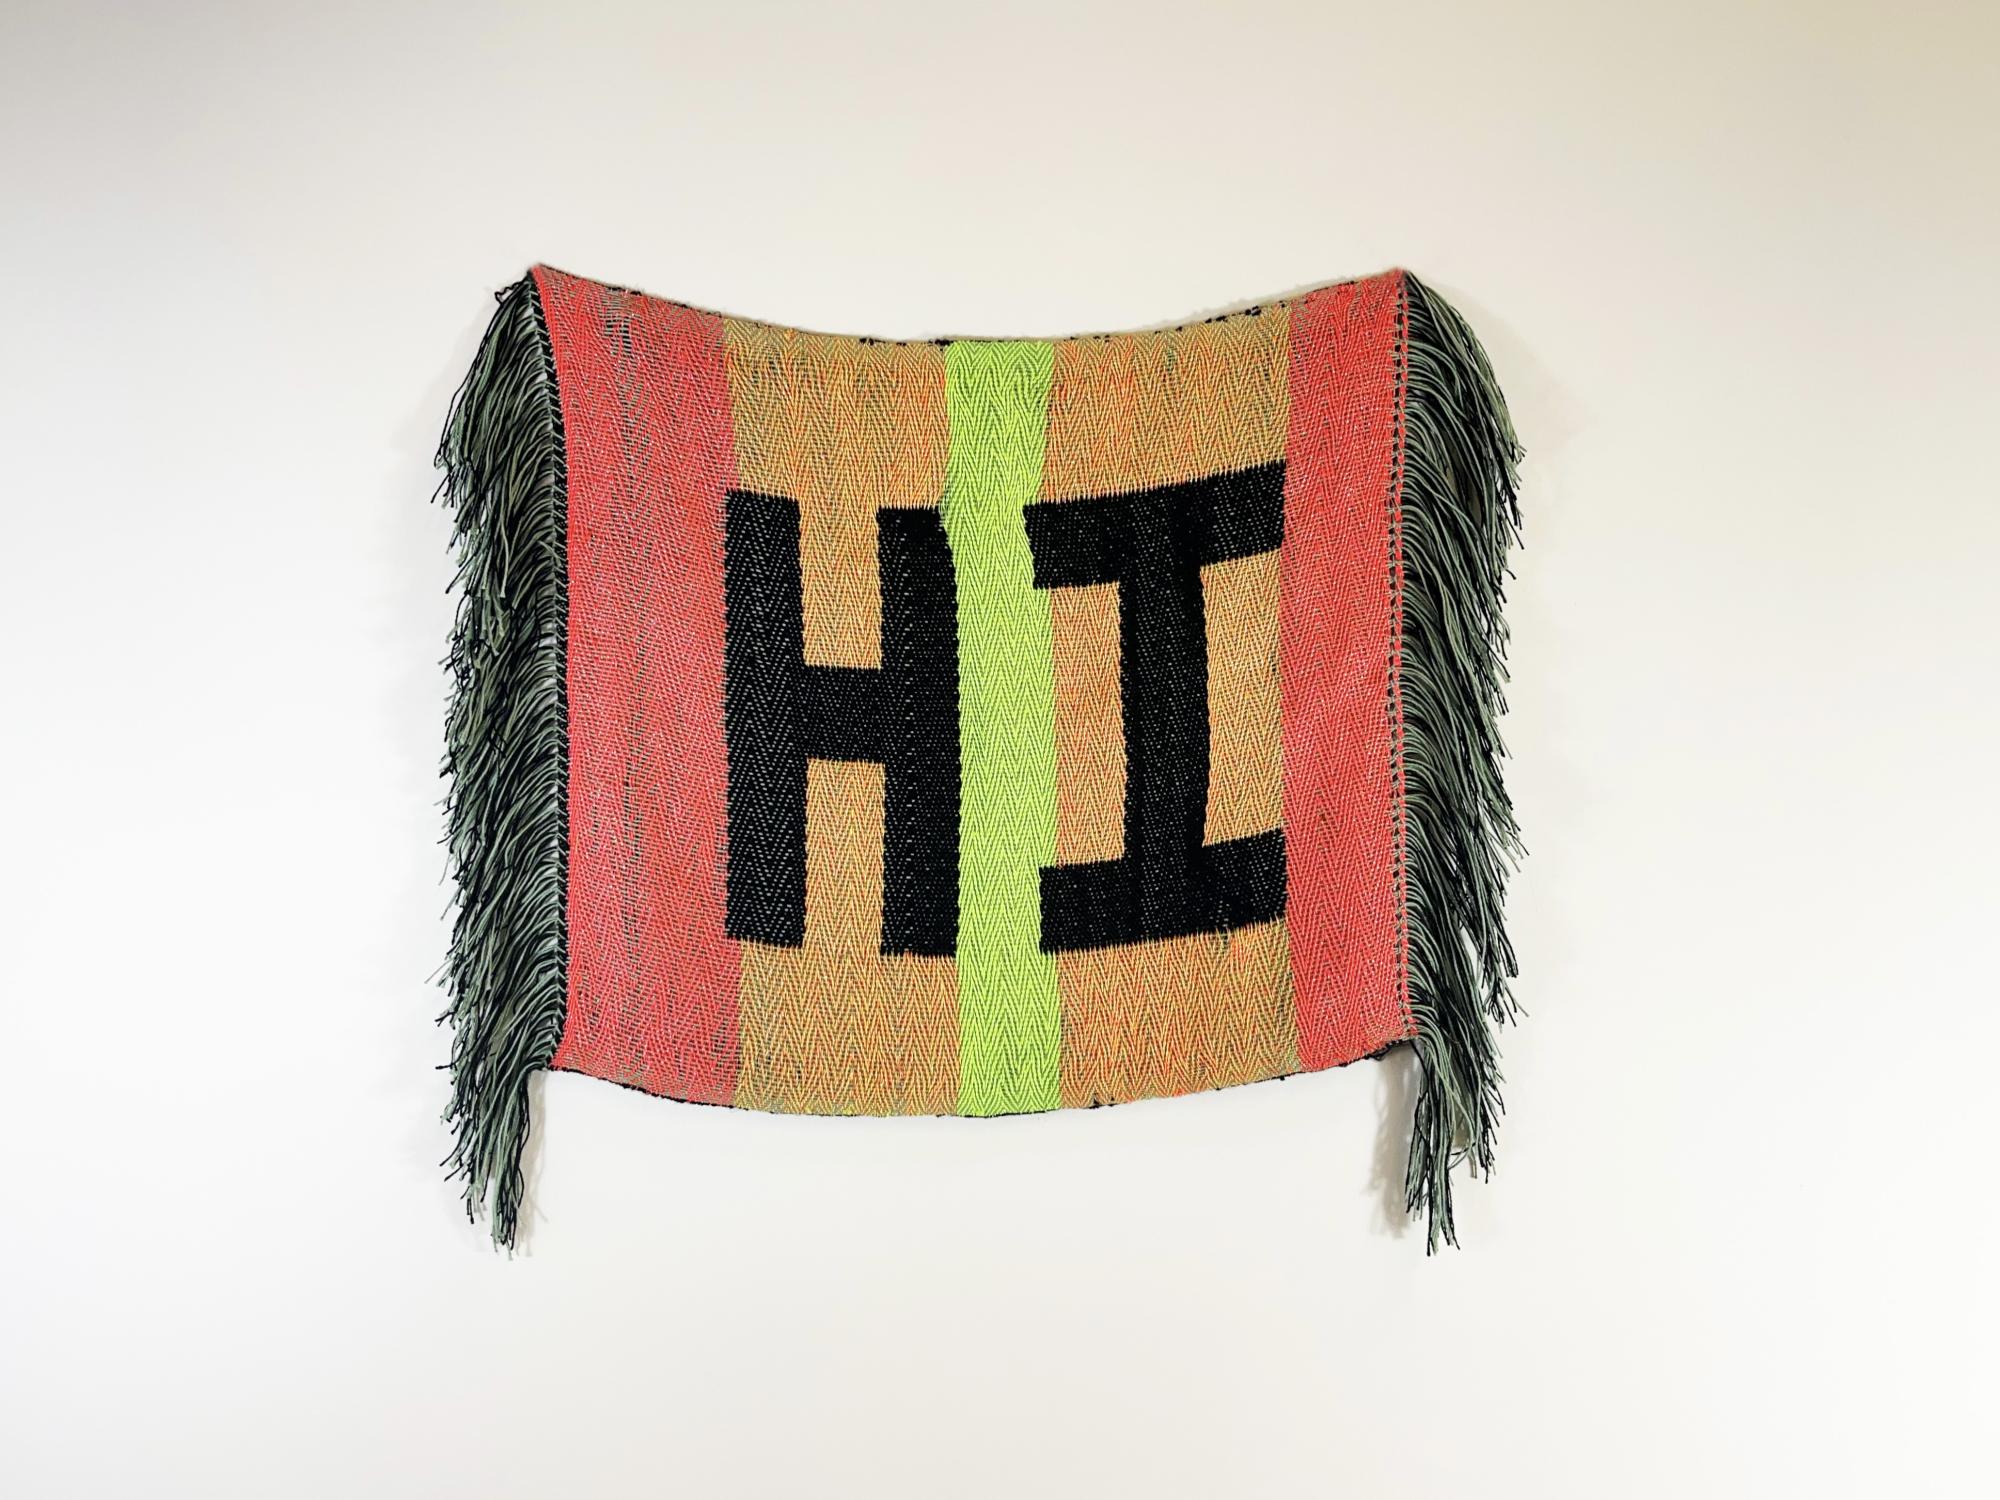 A bright orange, lime green and orange weaving with the word "HI" in black in the middle